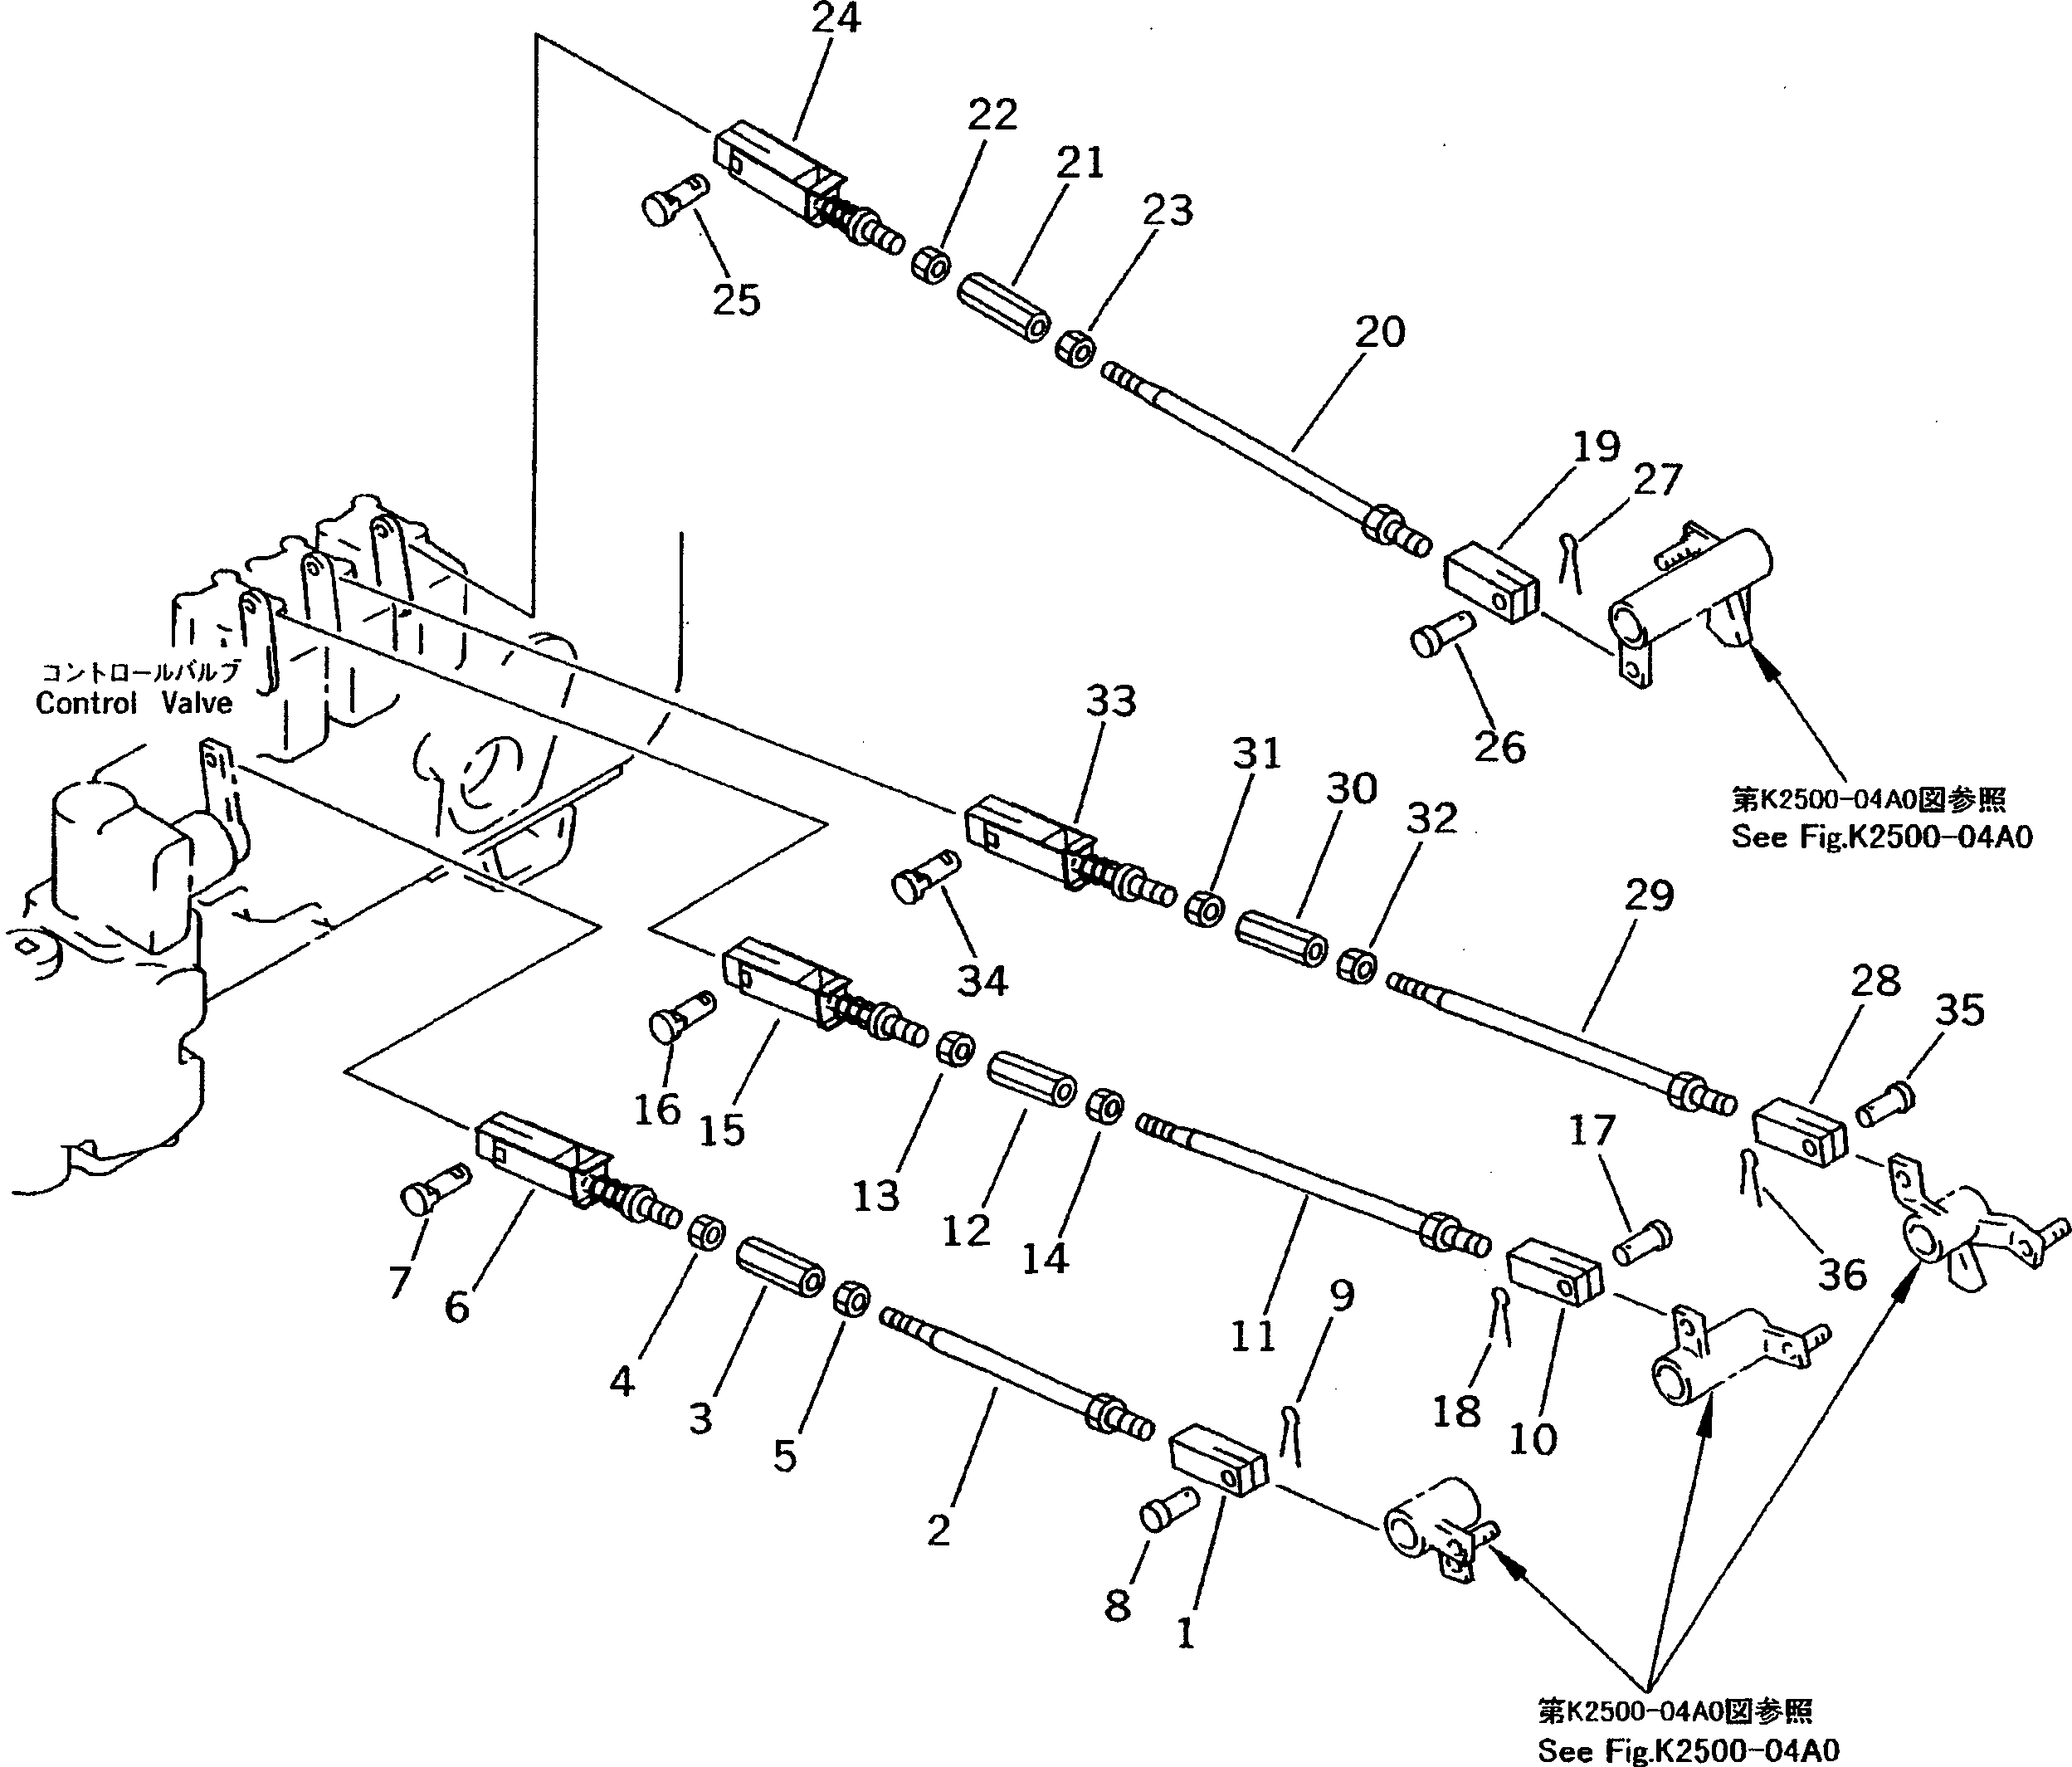 D275A-1C @@18219@ LADE AND RIPPER CONTROL LINKAGE (2/2)